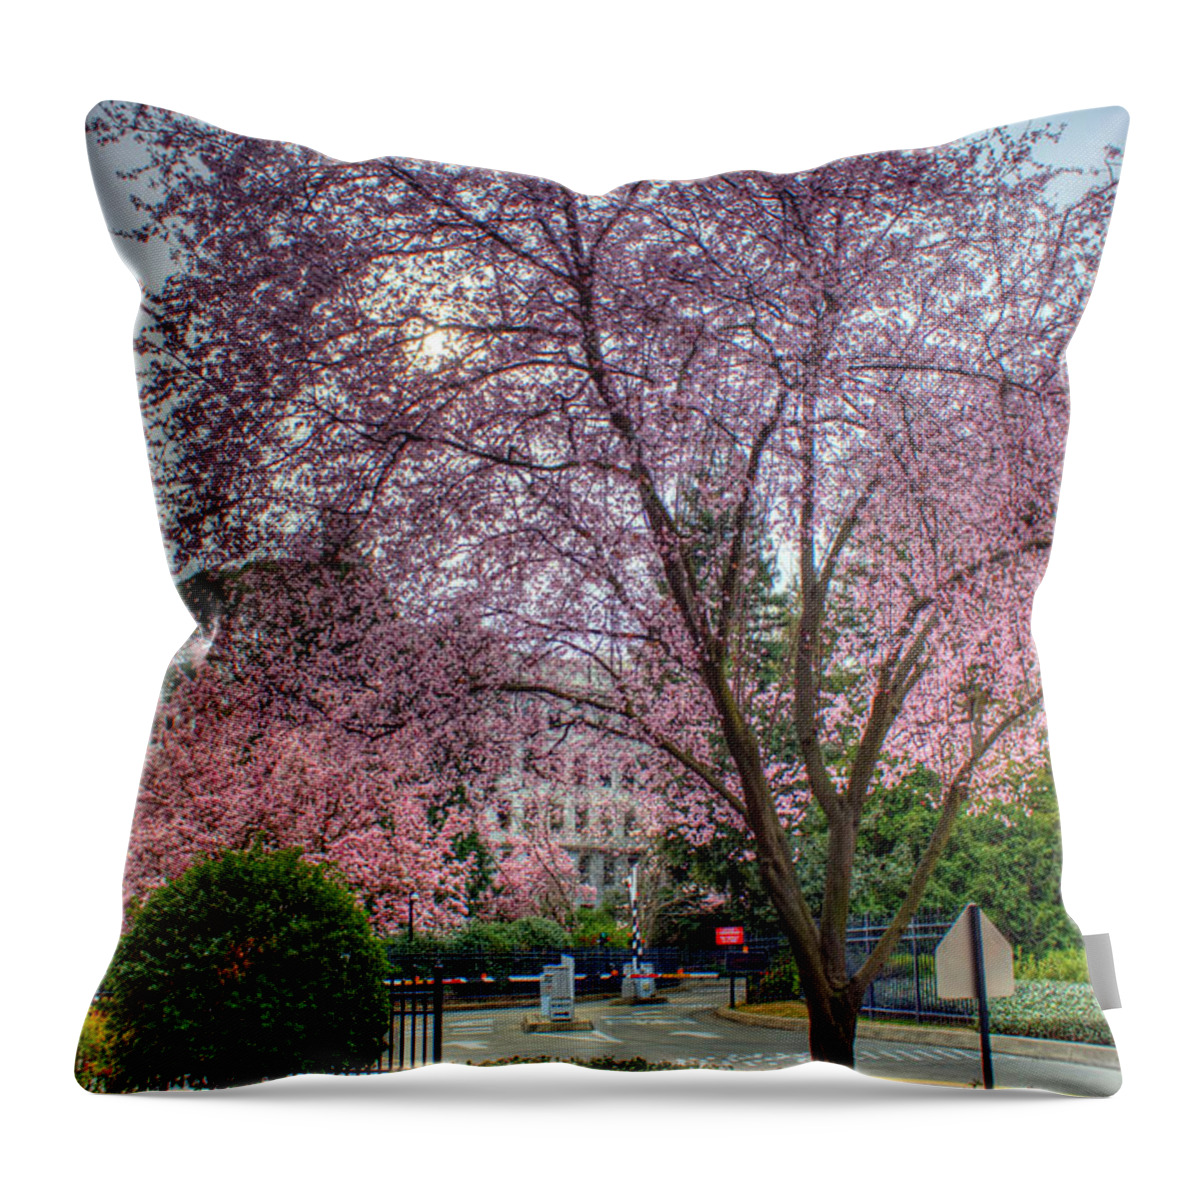 Lavendar Throw Pillow featuring the photograph Capitol Tree by Randy Wehner